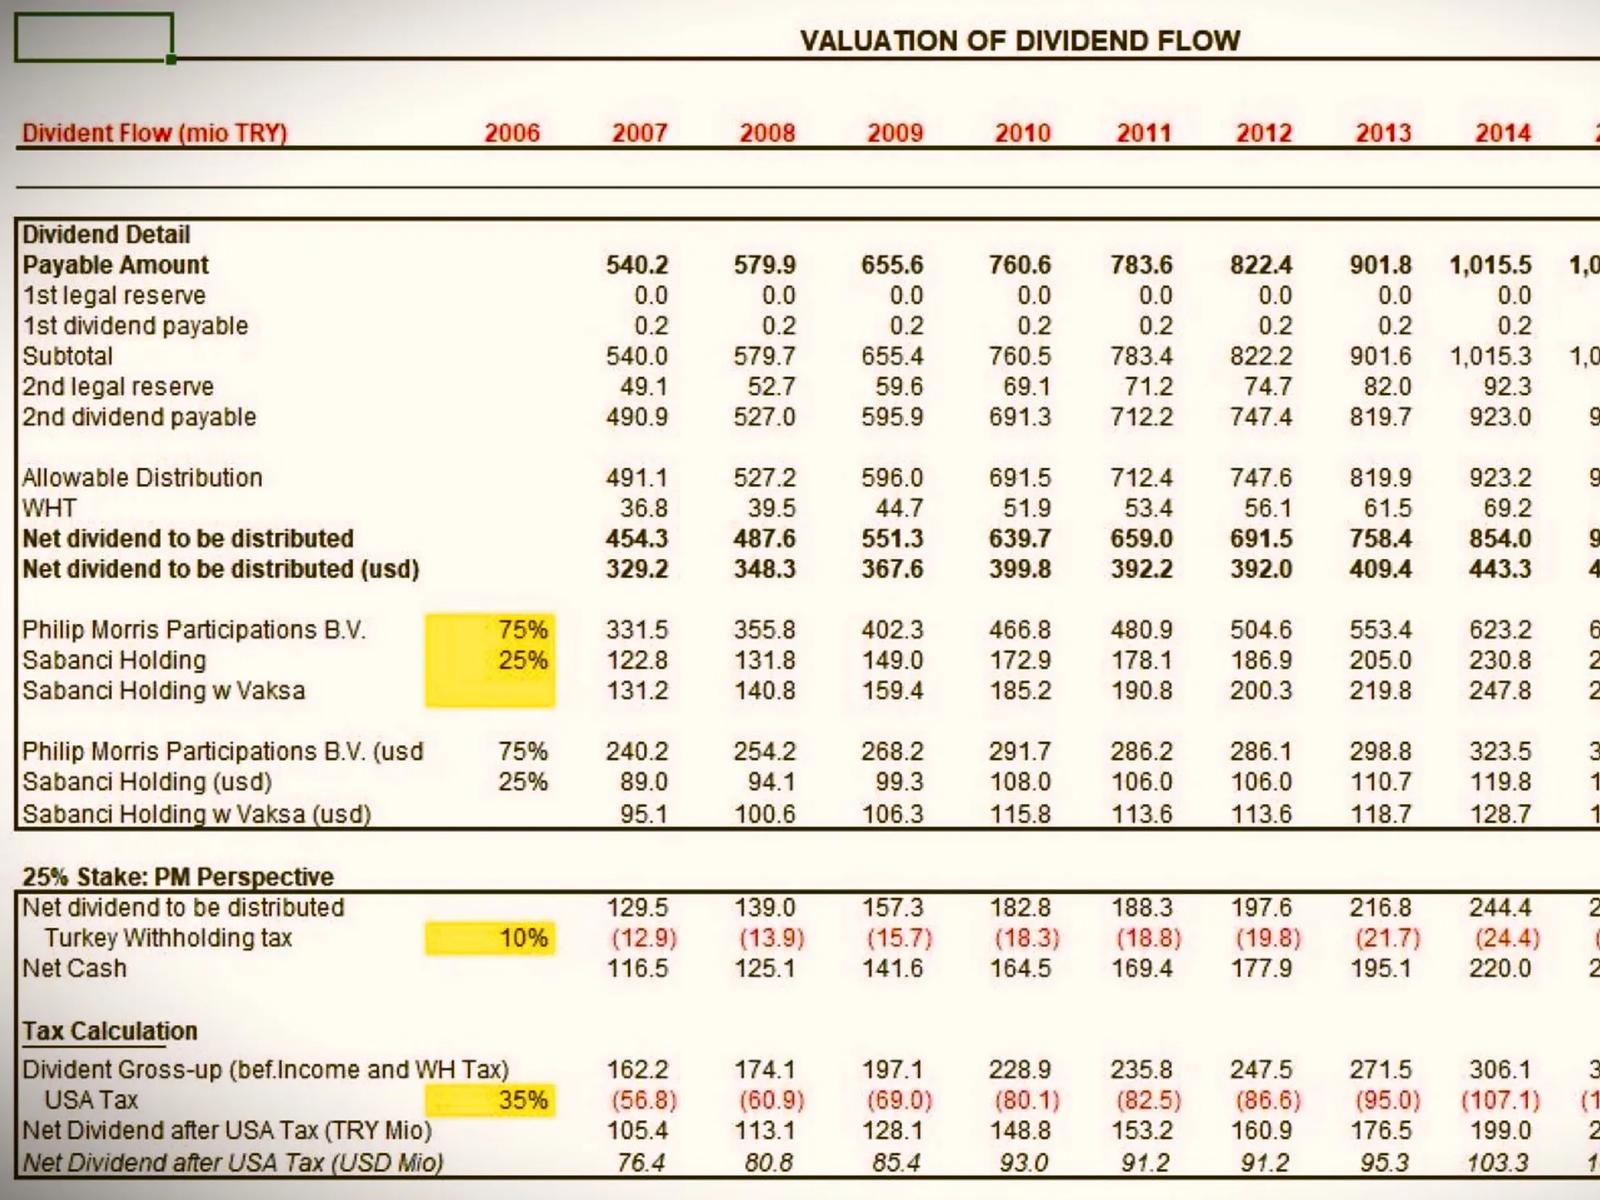 Valuation of Turkish Cigarette Monopoly